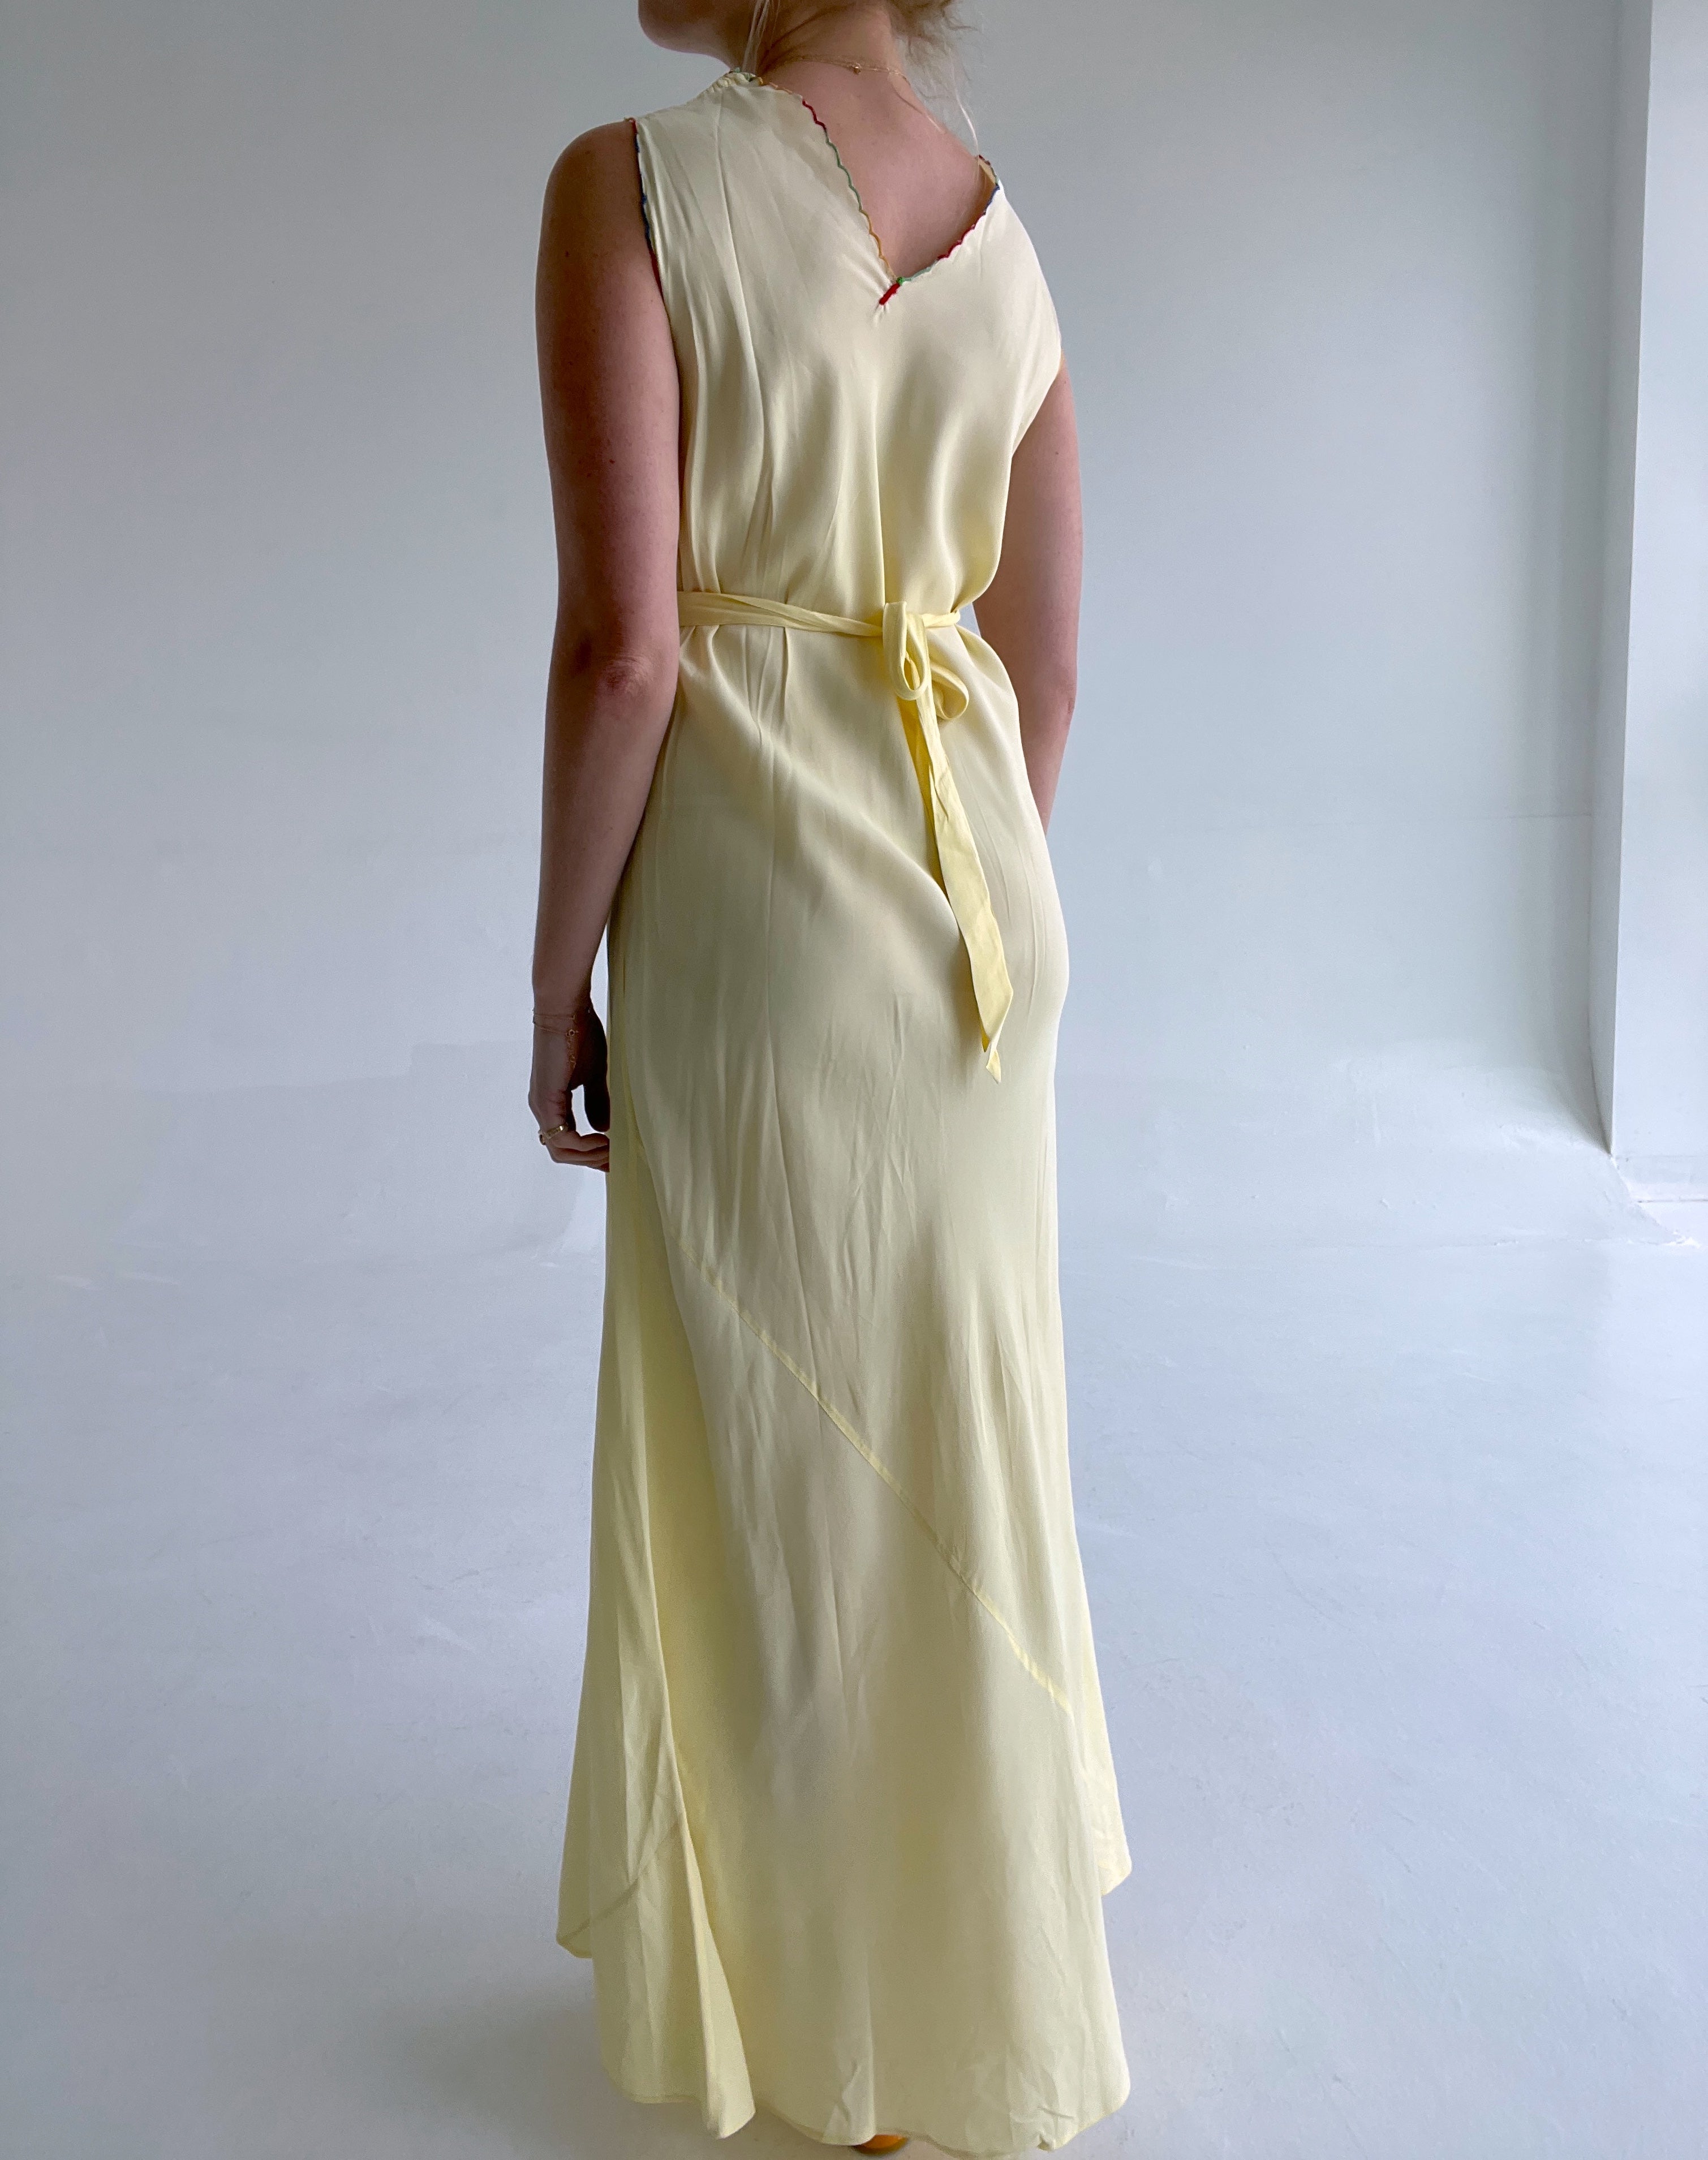 1930's Canary Yellow Dress with Multicolor Stitching